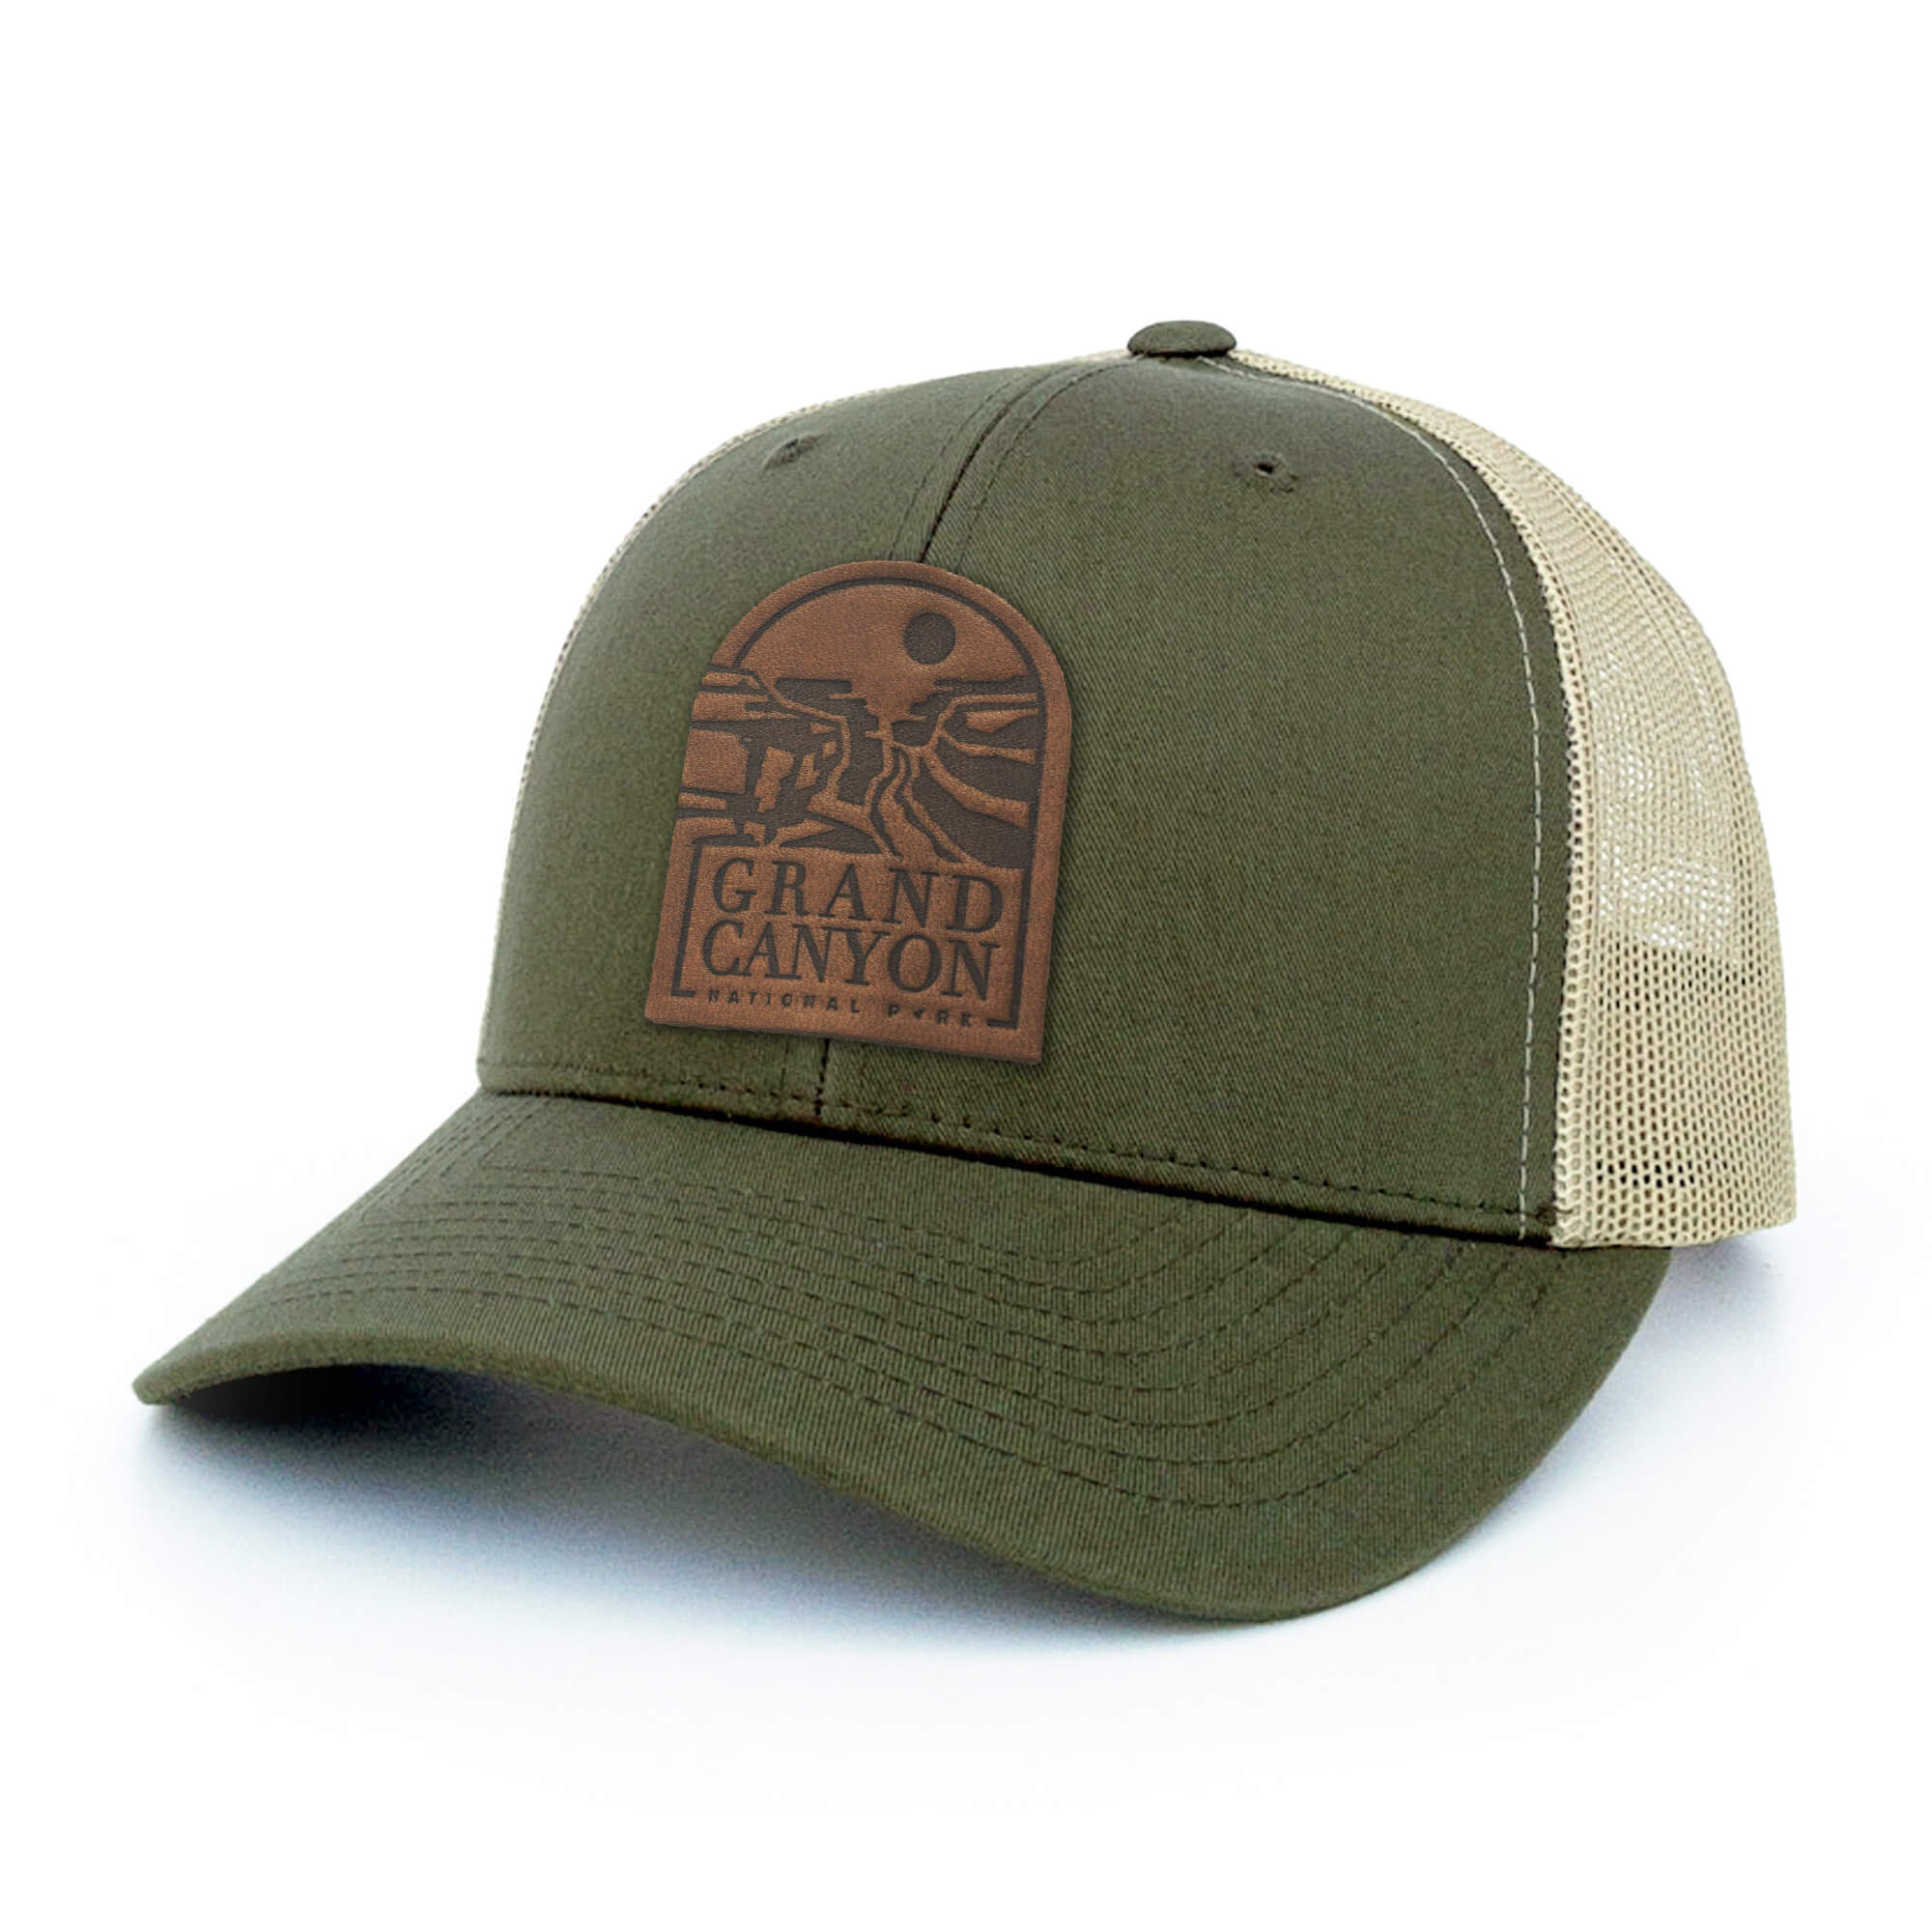 Moss green and khaki trucker hat with full-grain leather patch of Grand Canyon National Park | BLACK-007-004, CHARC-007-004, NAVY-007-004, HGREY-007-004, MOSS-007-004, BROWN-007-004